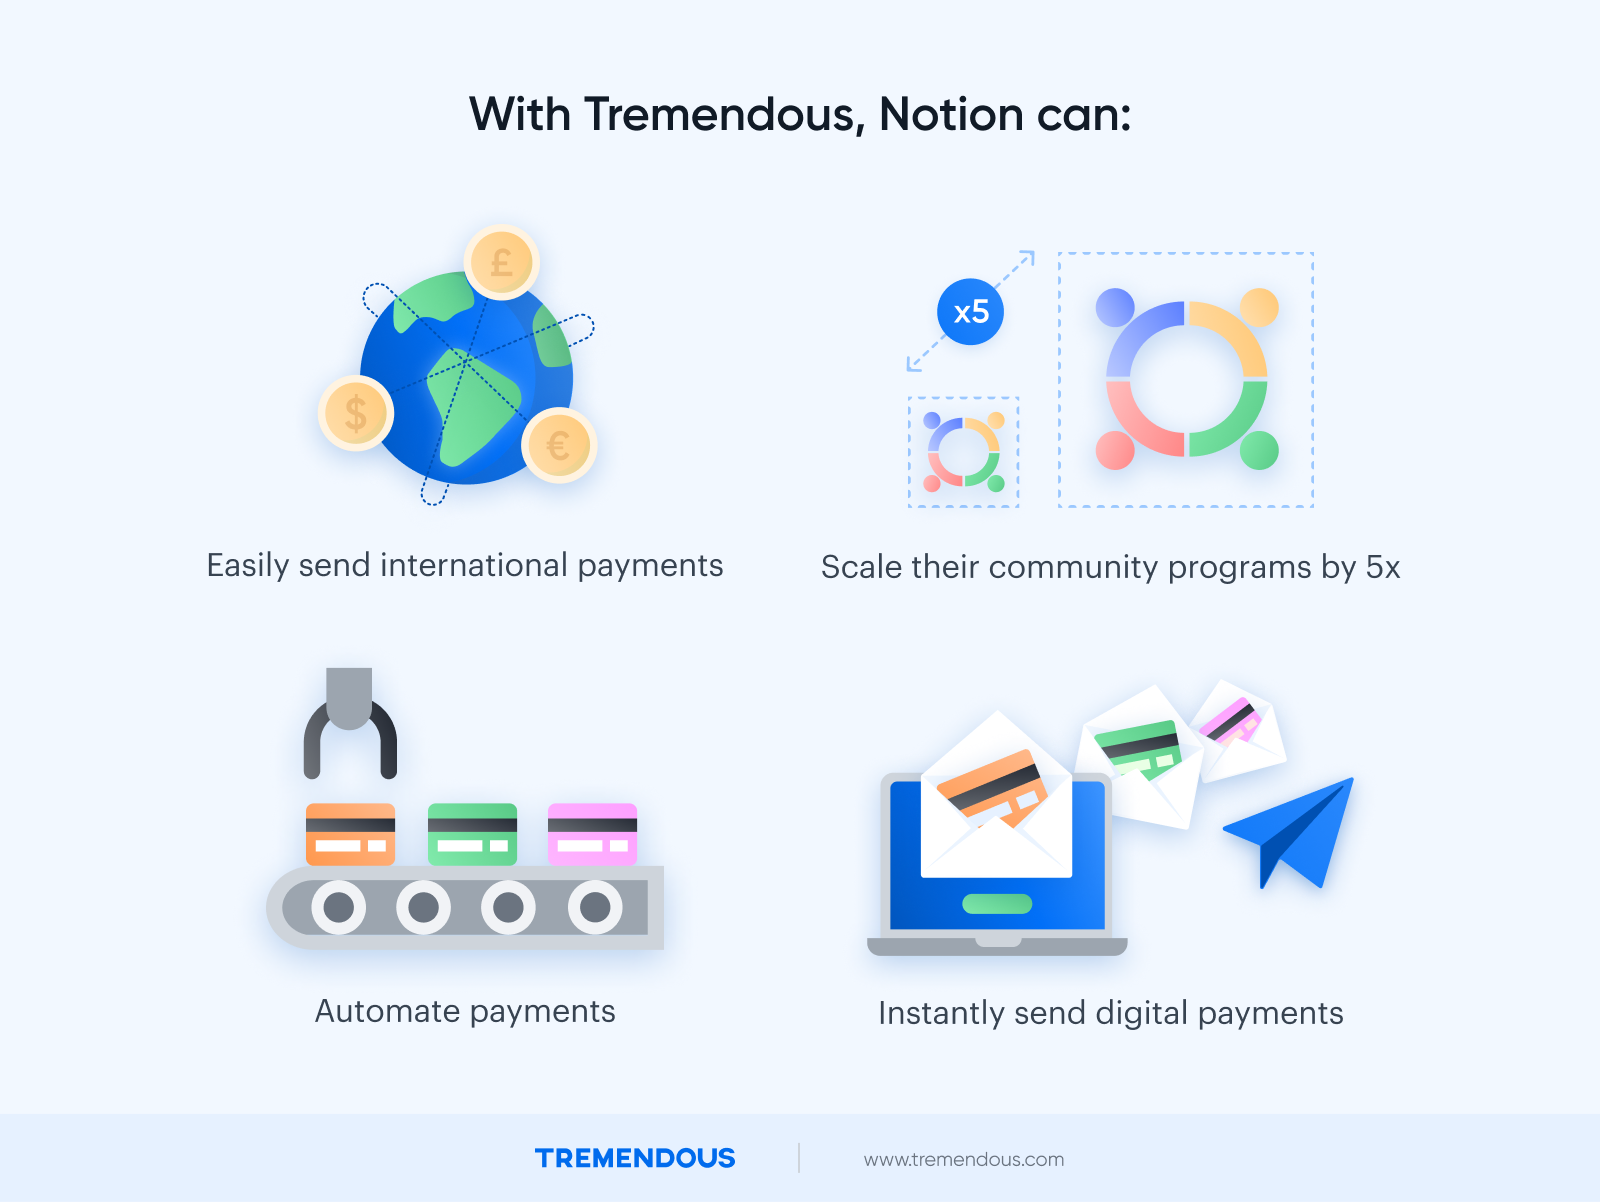 With Tremendous, Notion can send international payments, scale their community by 5x, and automate sending digital payments.